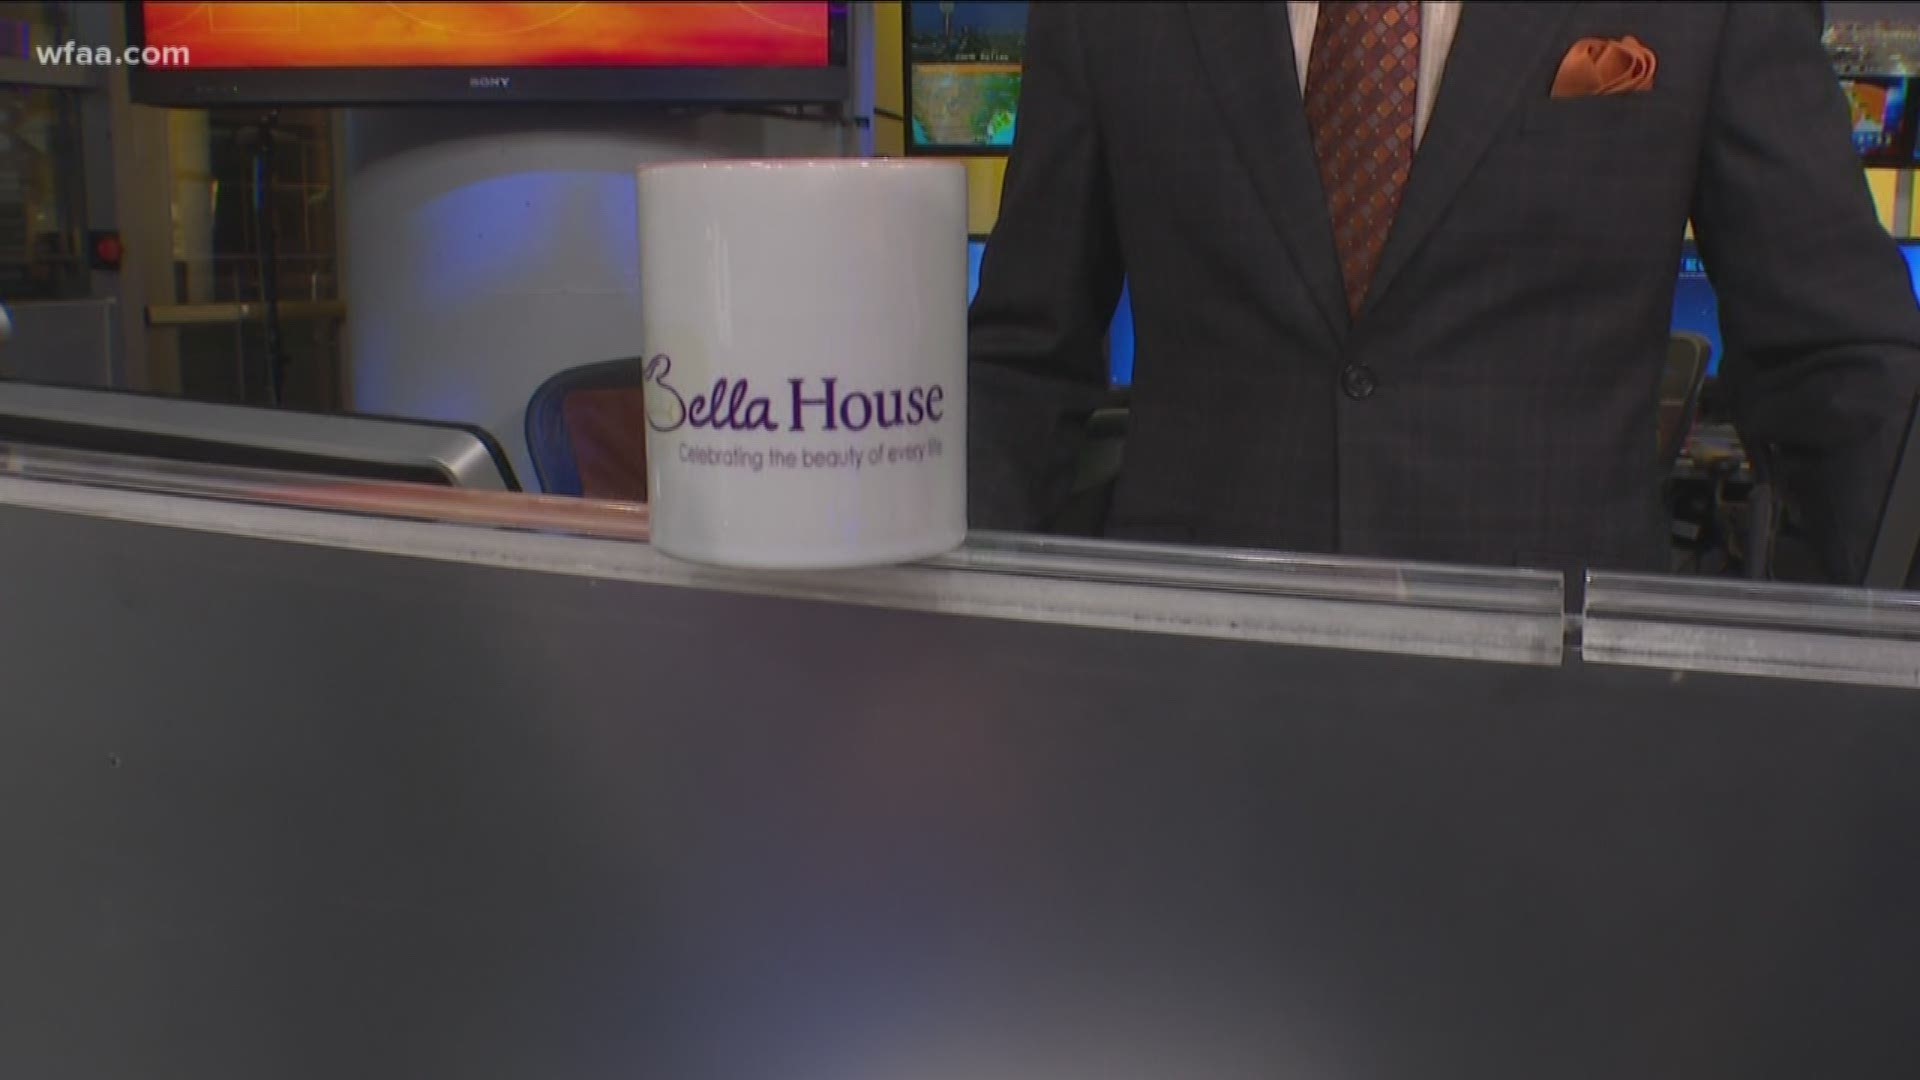 What's up with Greg's cup? The Bella House